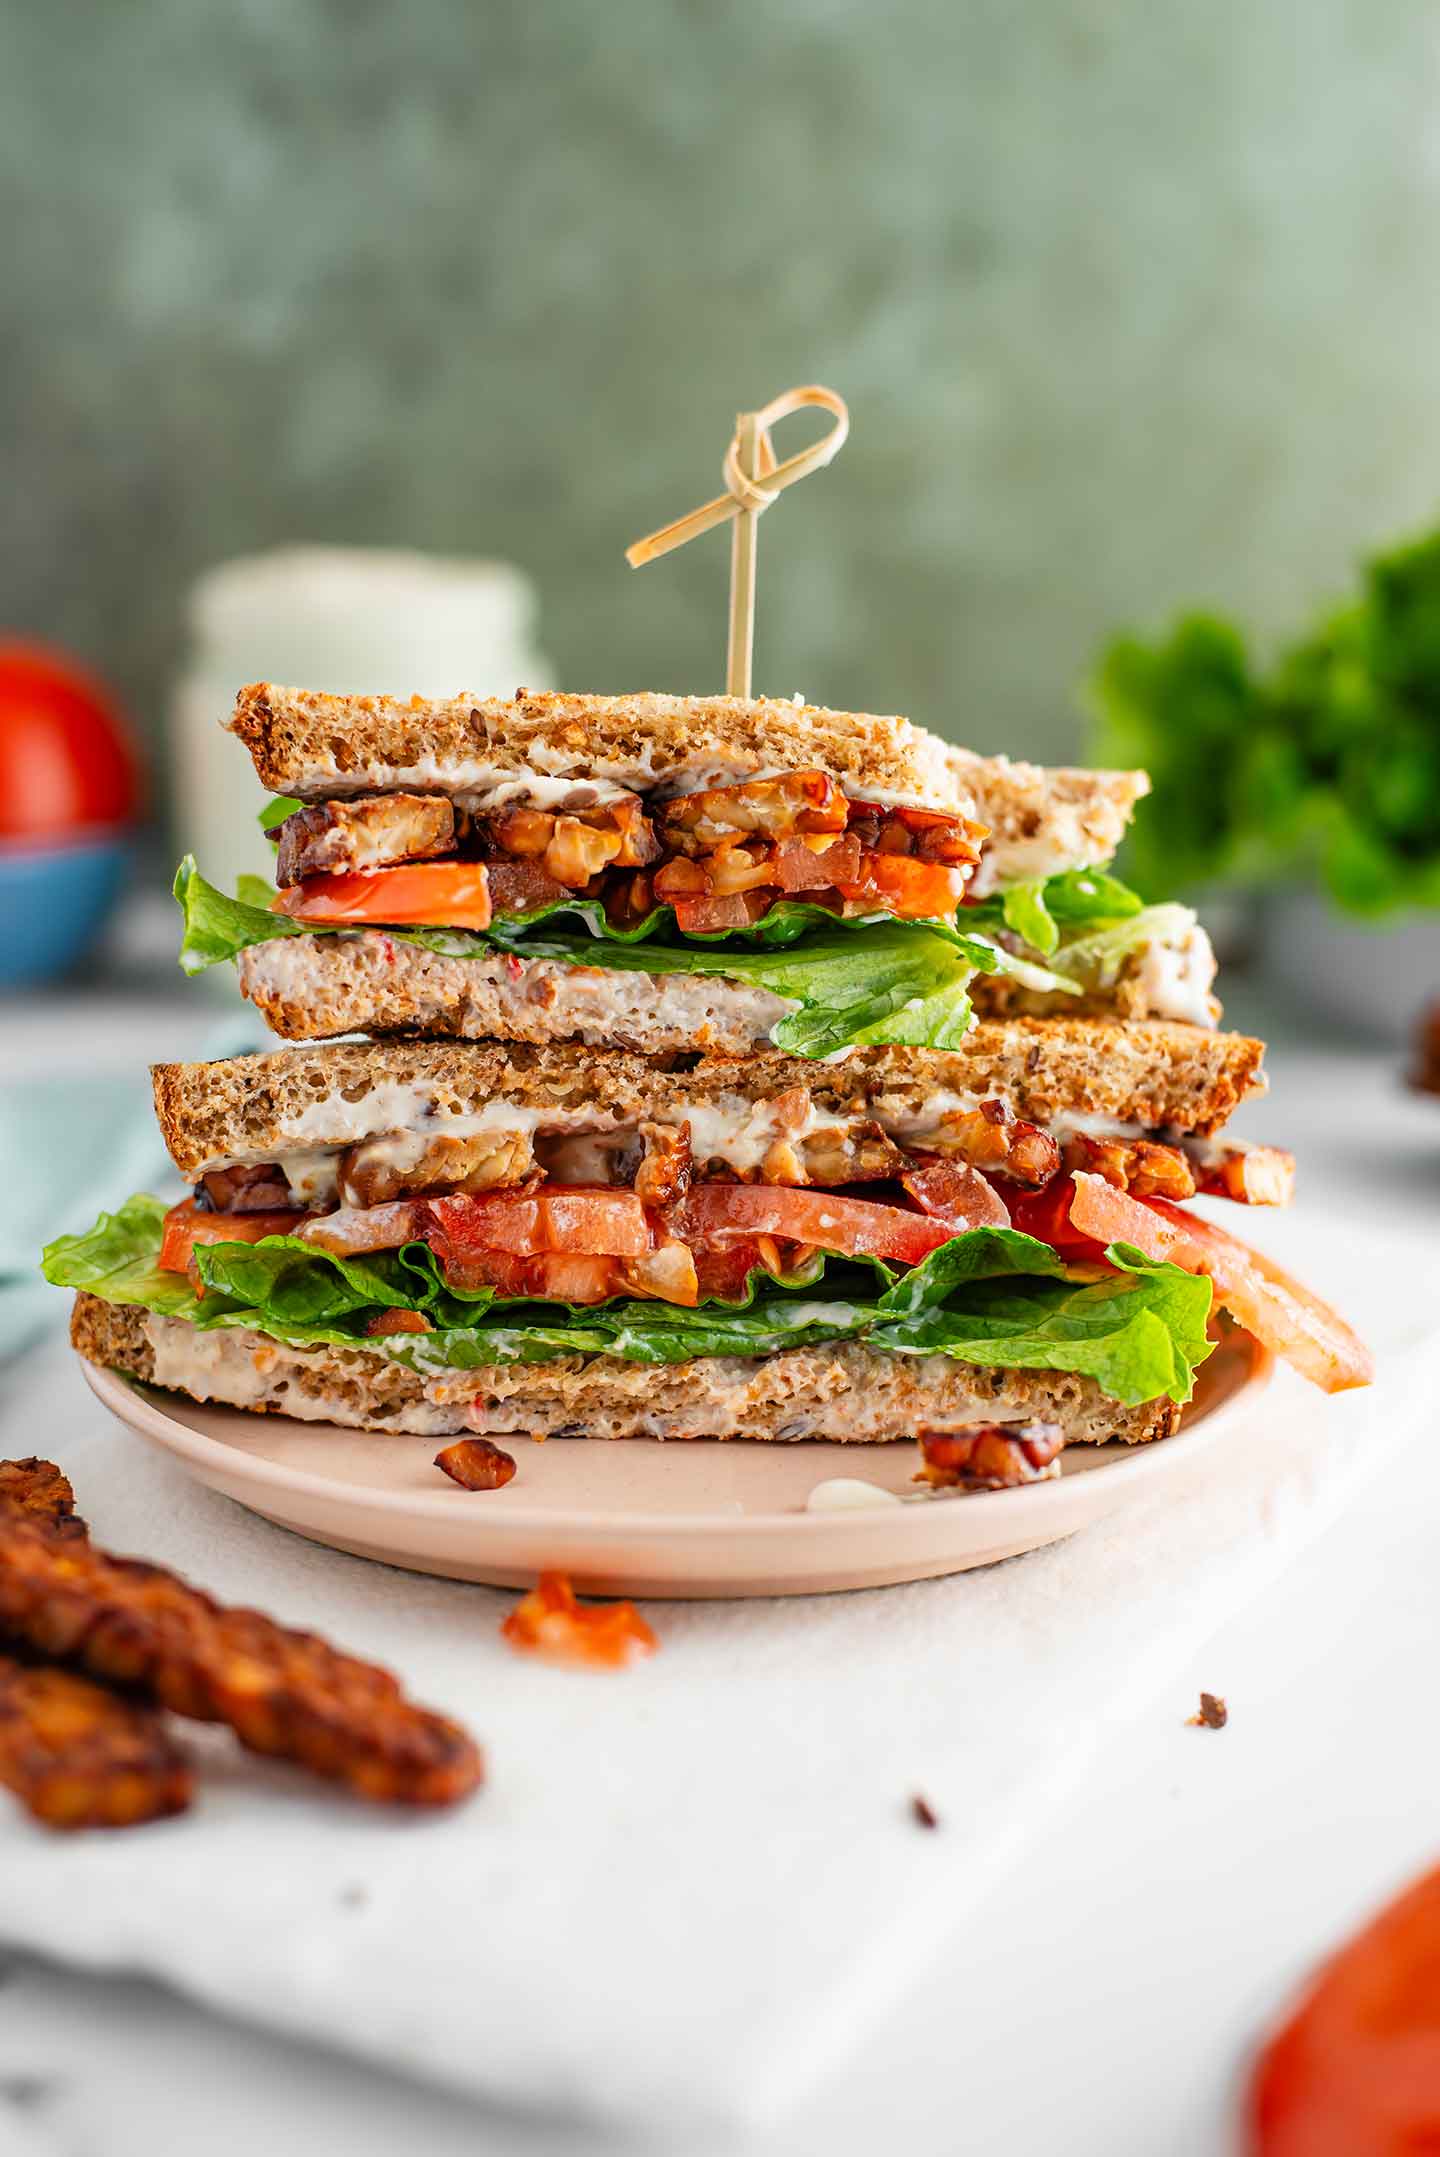 Side view of two halves of a vegan BLT stacked on one another. The top half has a large bite removed. Crispy tempeh bacon, lettuce, tomato, and oil-free mayonnaise fill the packed sandwich. A bamboo skewer holds the sandwich in place.